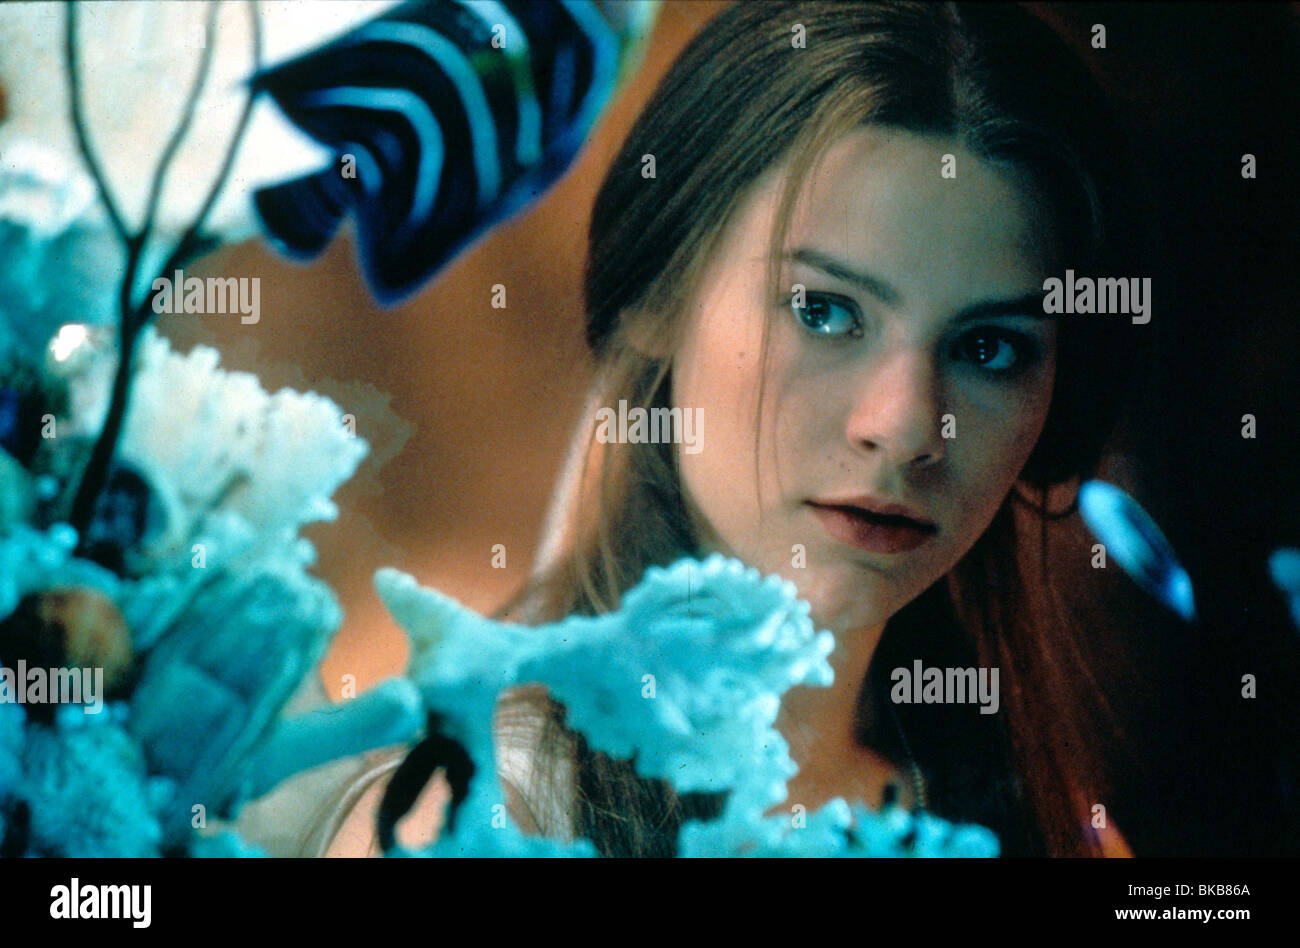 ROMEO AND JULIET CLAIRE DANES ROMJ 143 Stock Photo